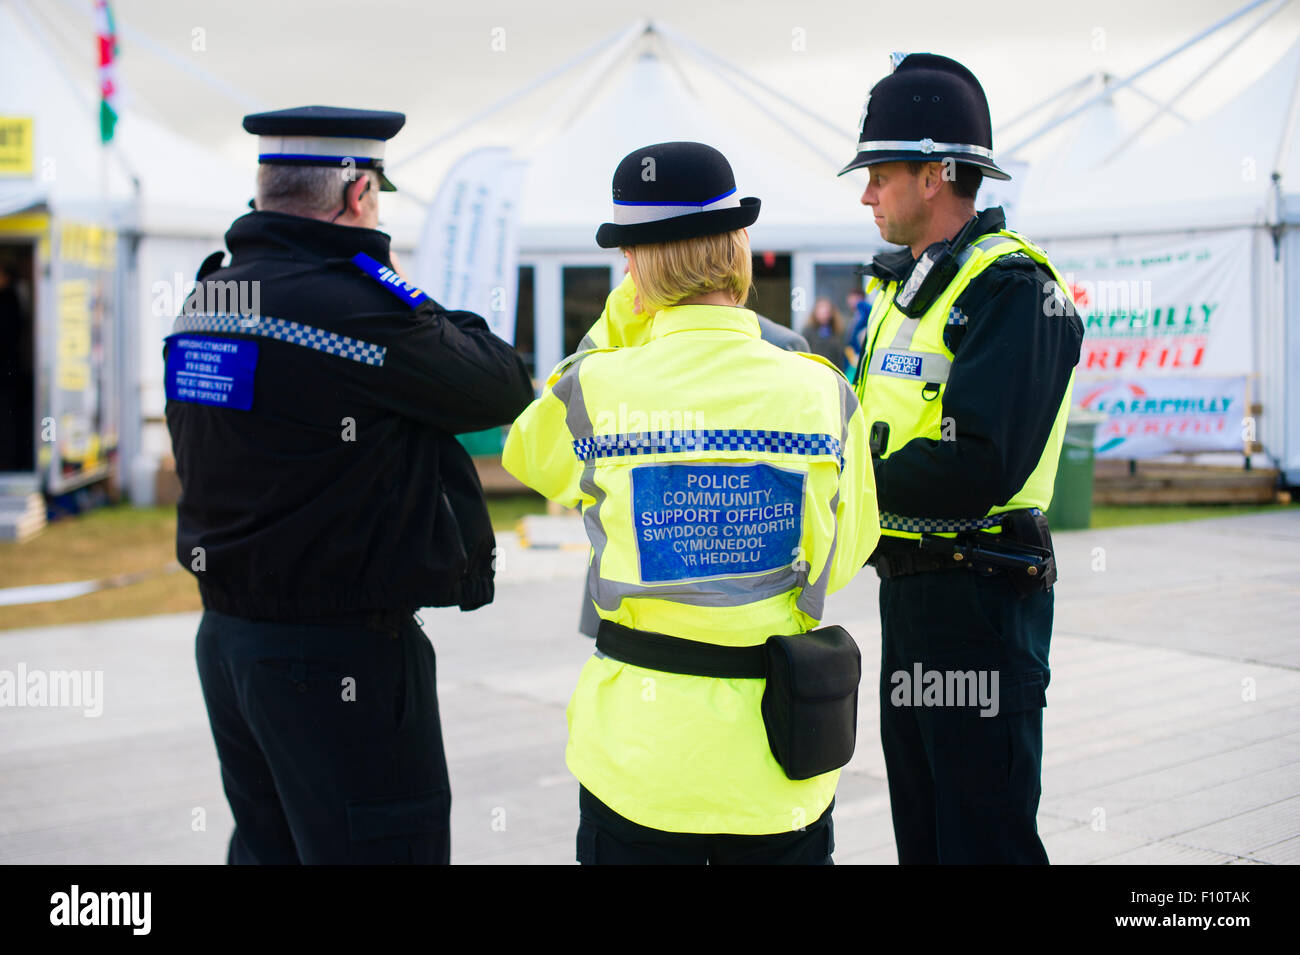 Drei Polizisten South Wales und CSO (Community Support Officers), Wales UK Stockfoto